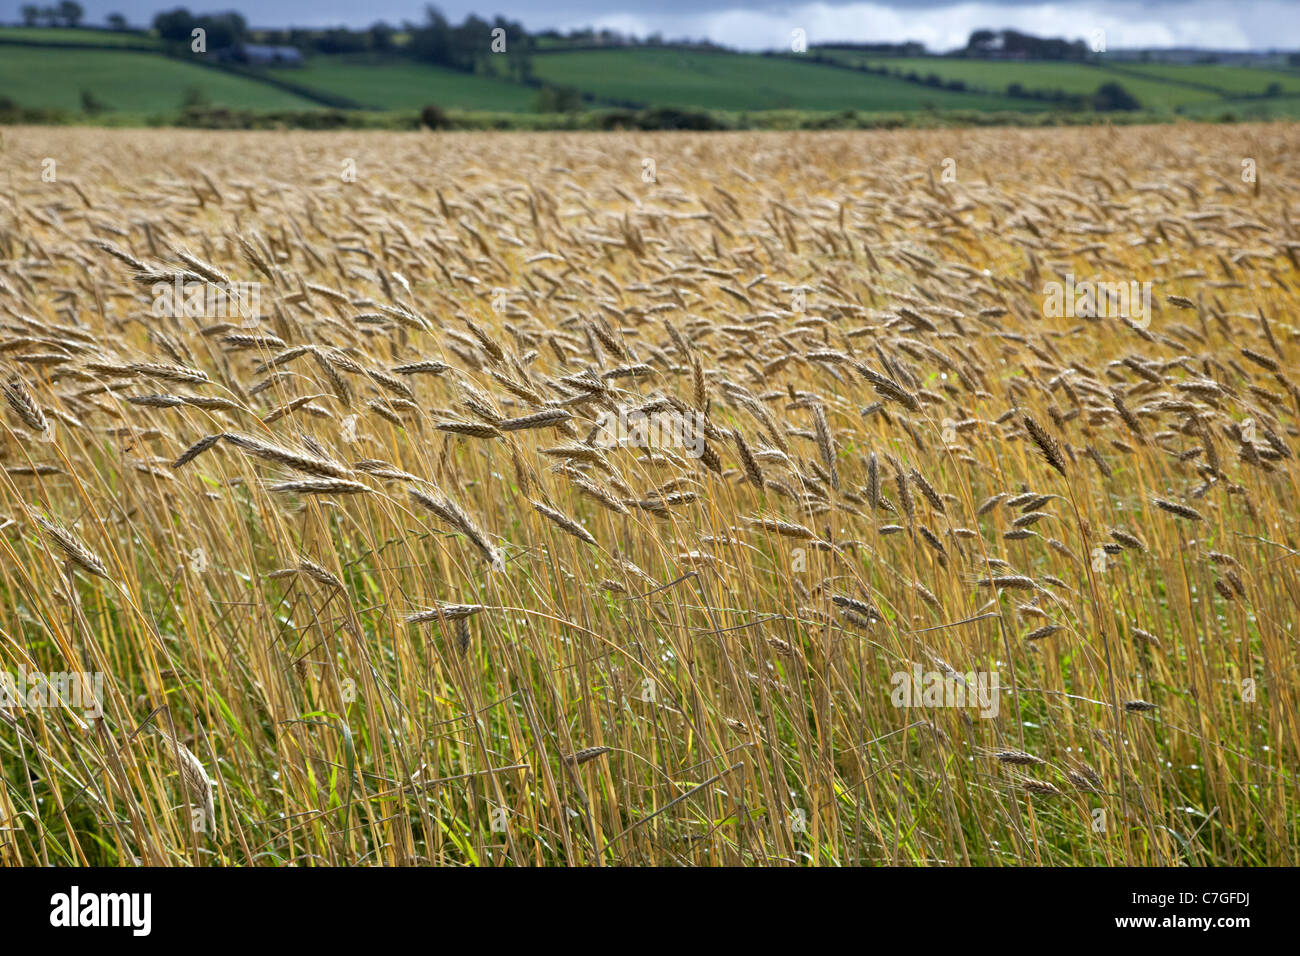 barley crop in a field ready for harvesting county donegal republic of ireland Stock Photo